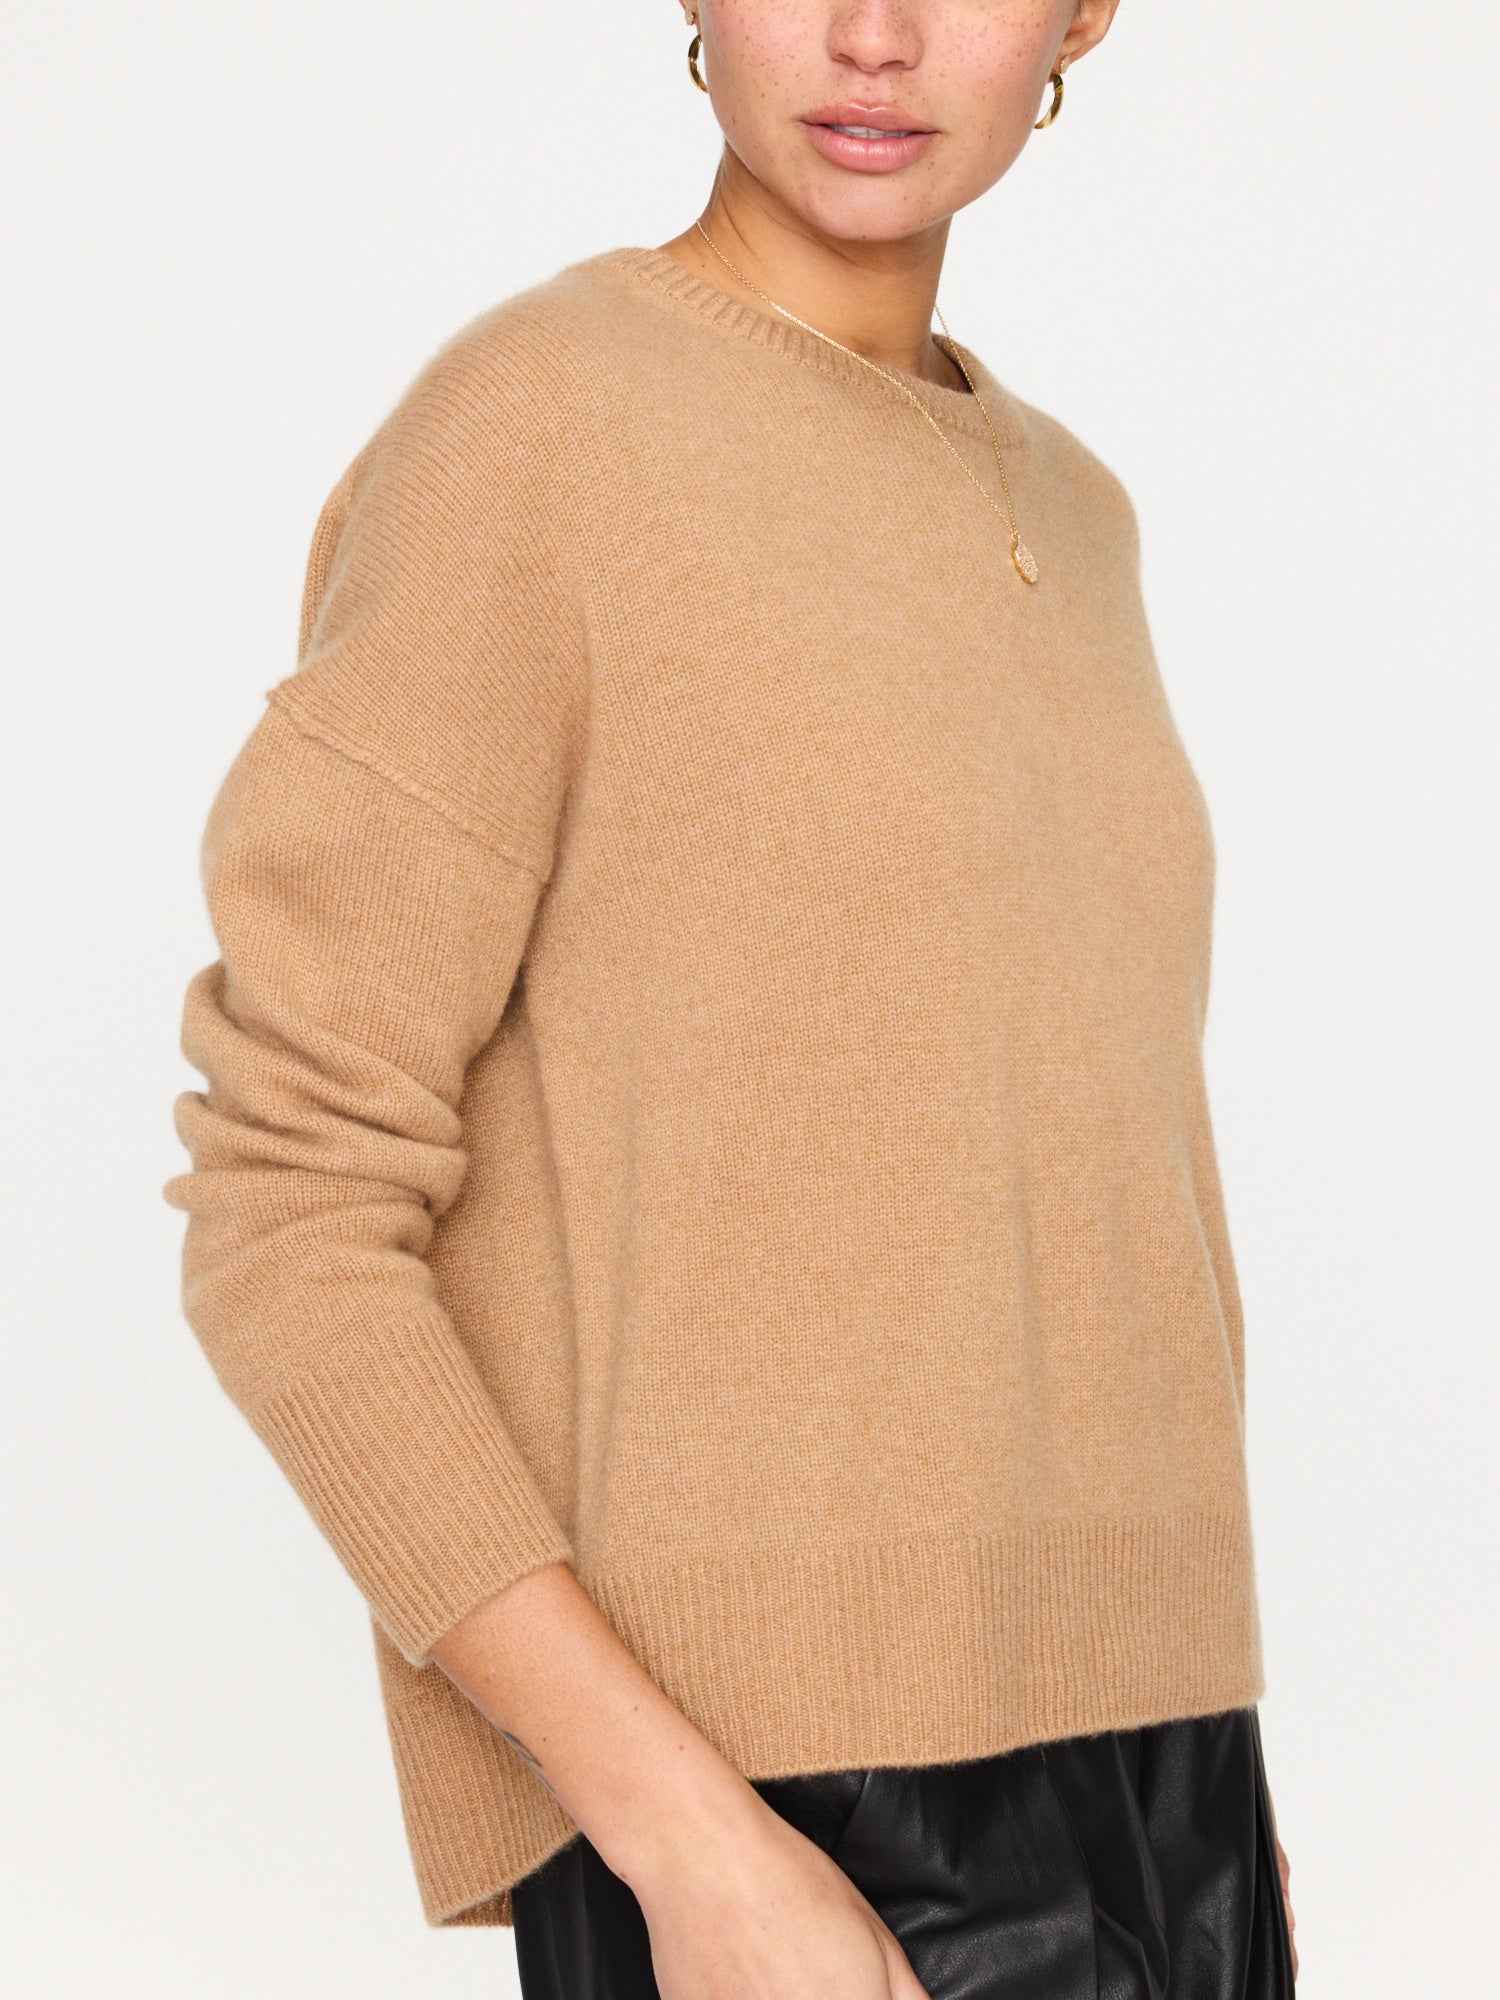 Everyday cashmere crewneck tan sweater side view